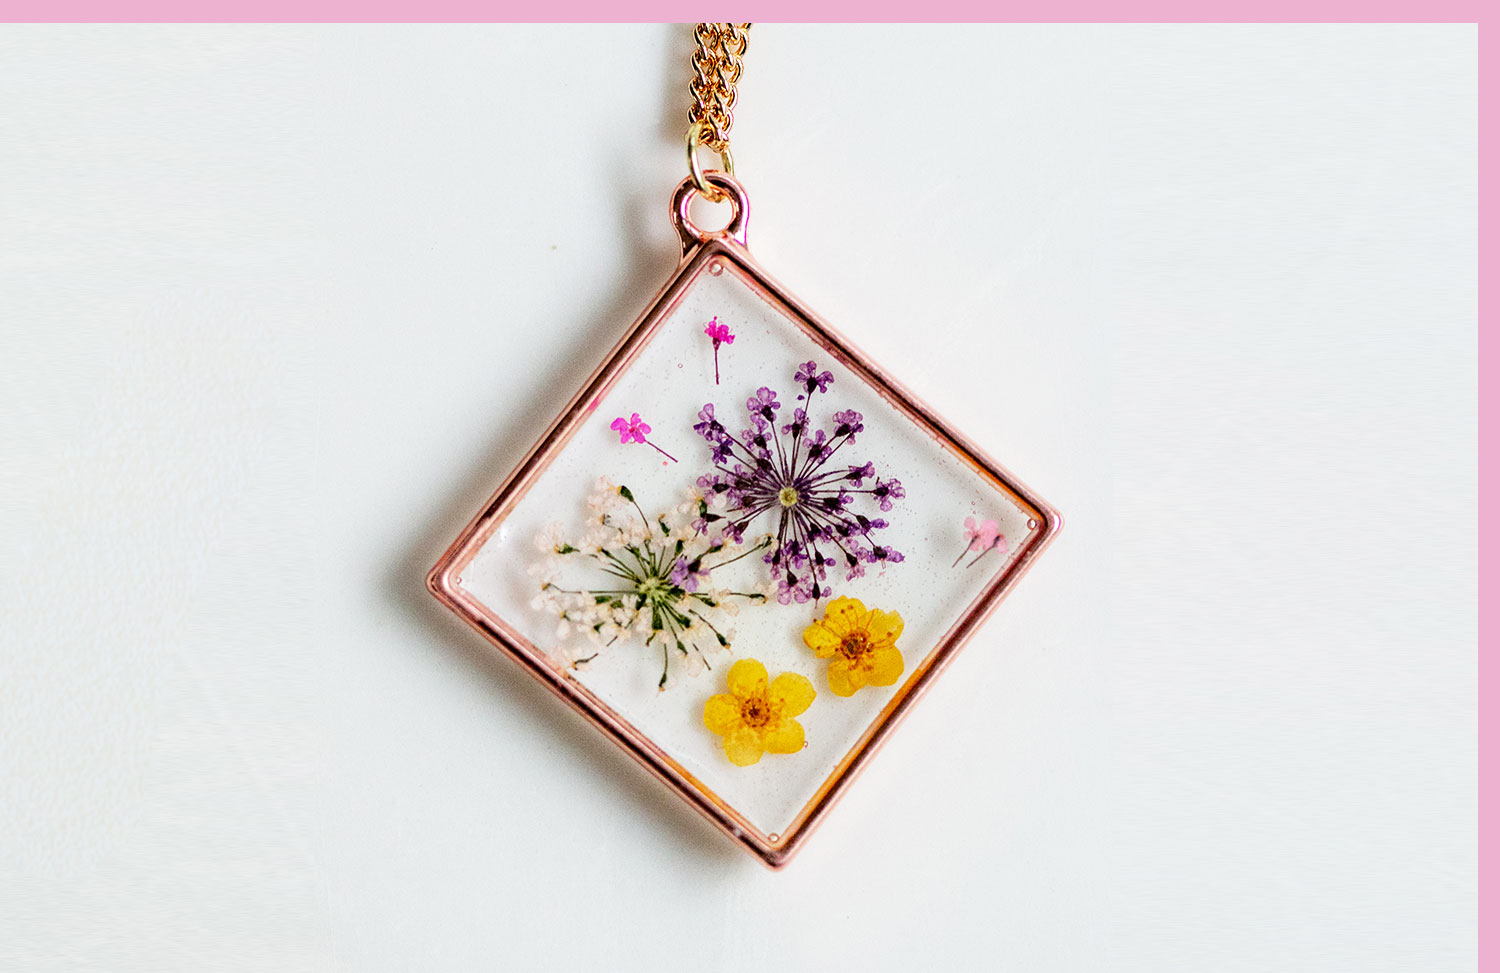 flowers pressed into a pendant necklace